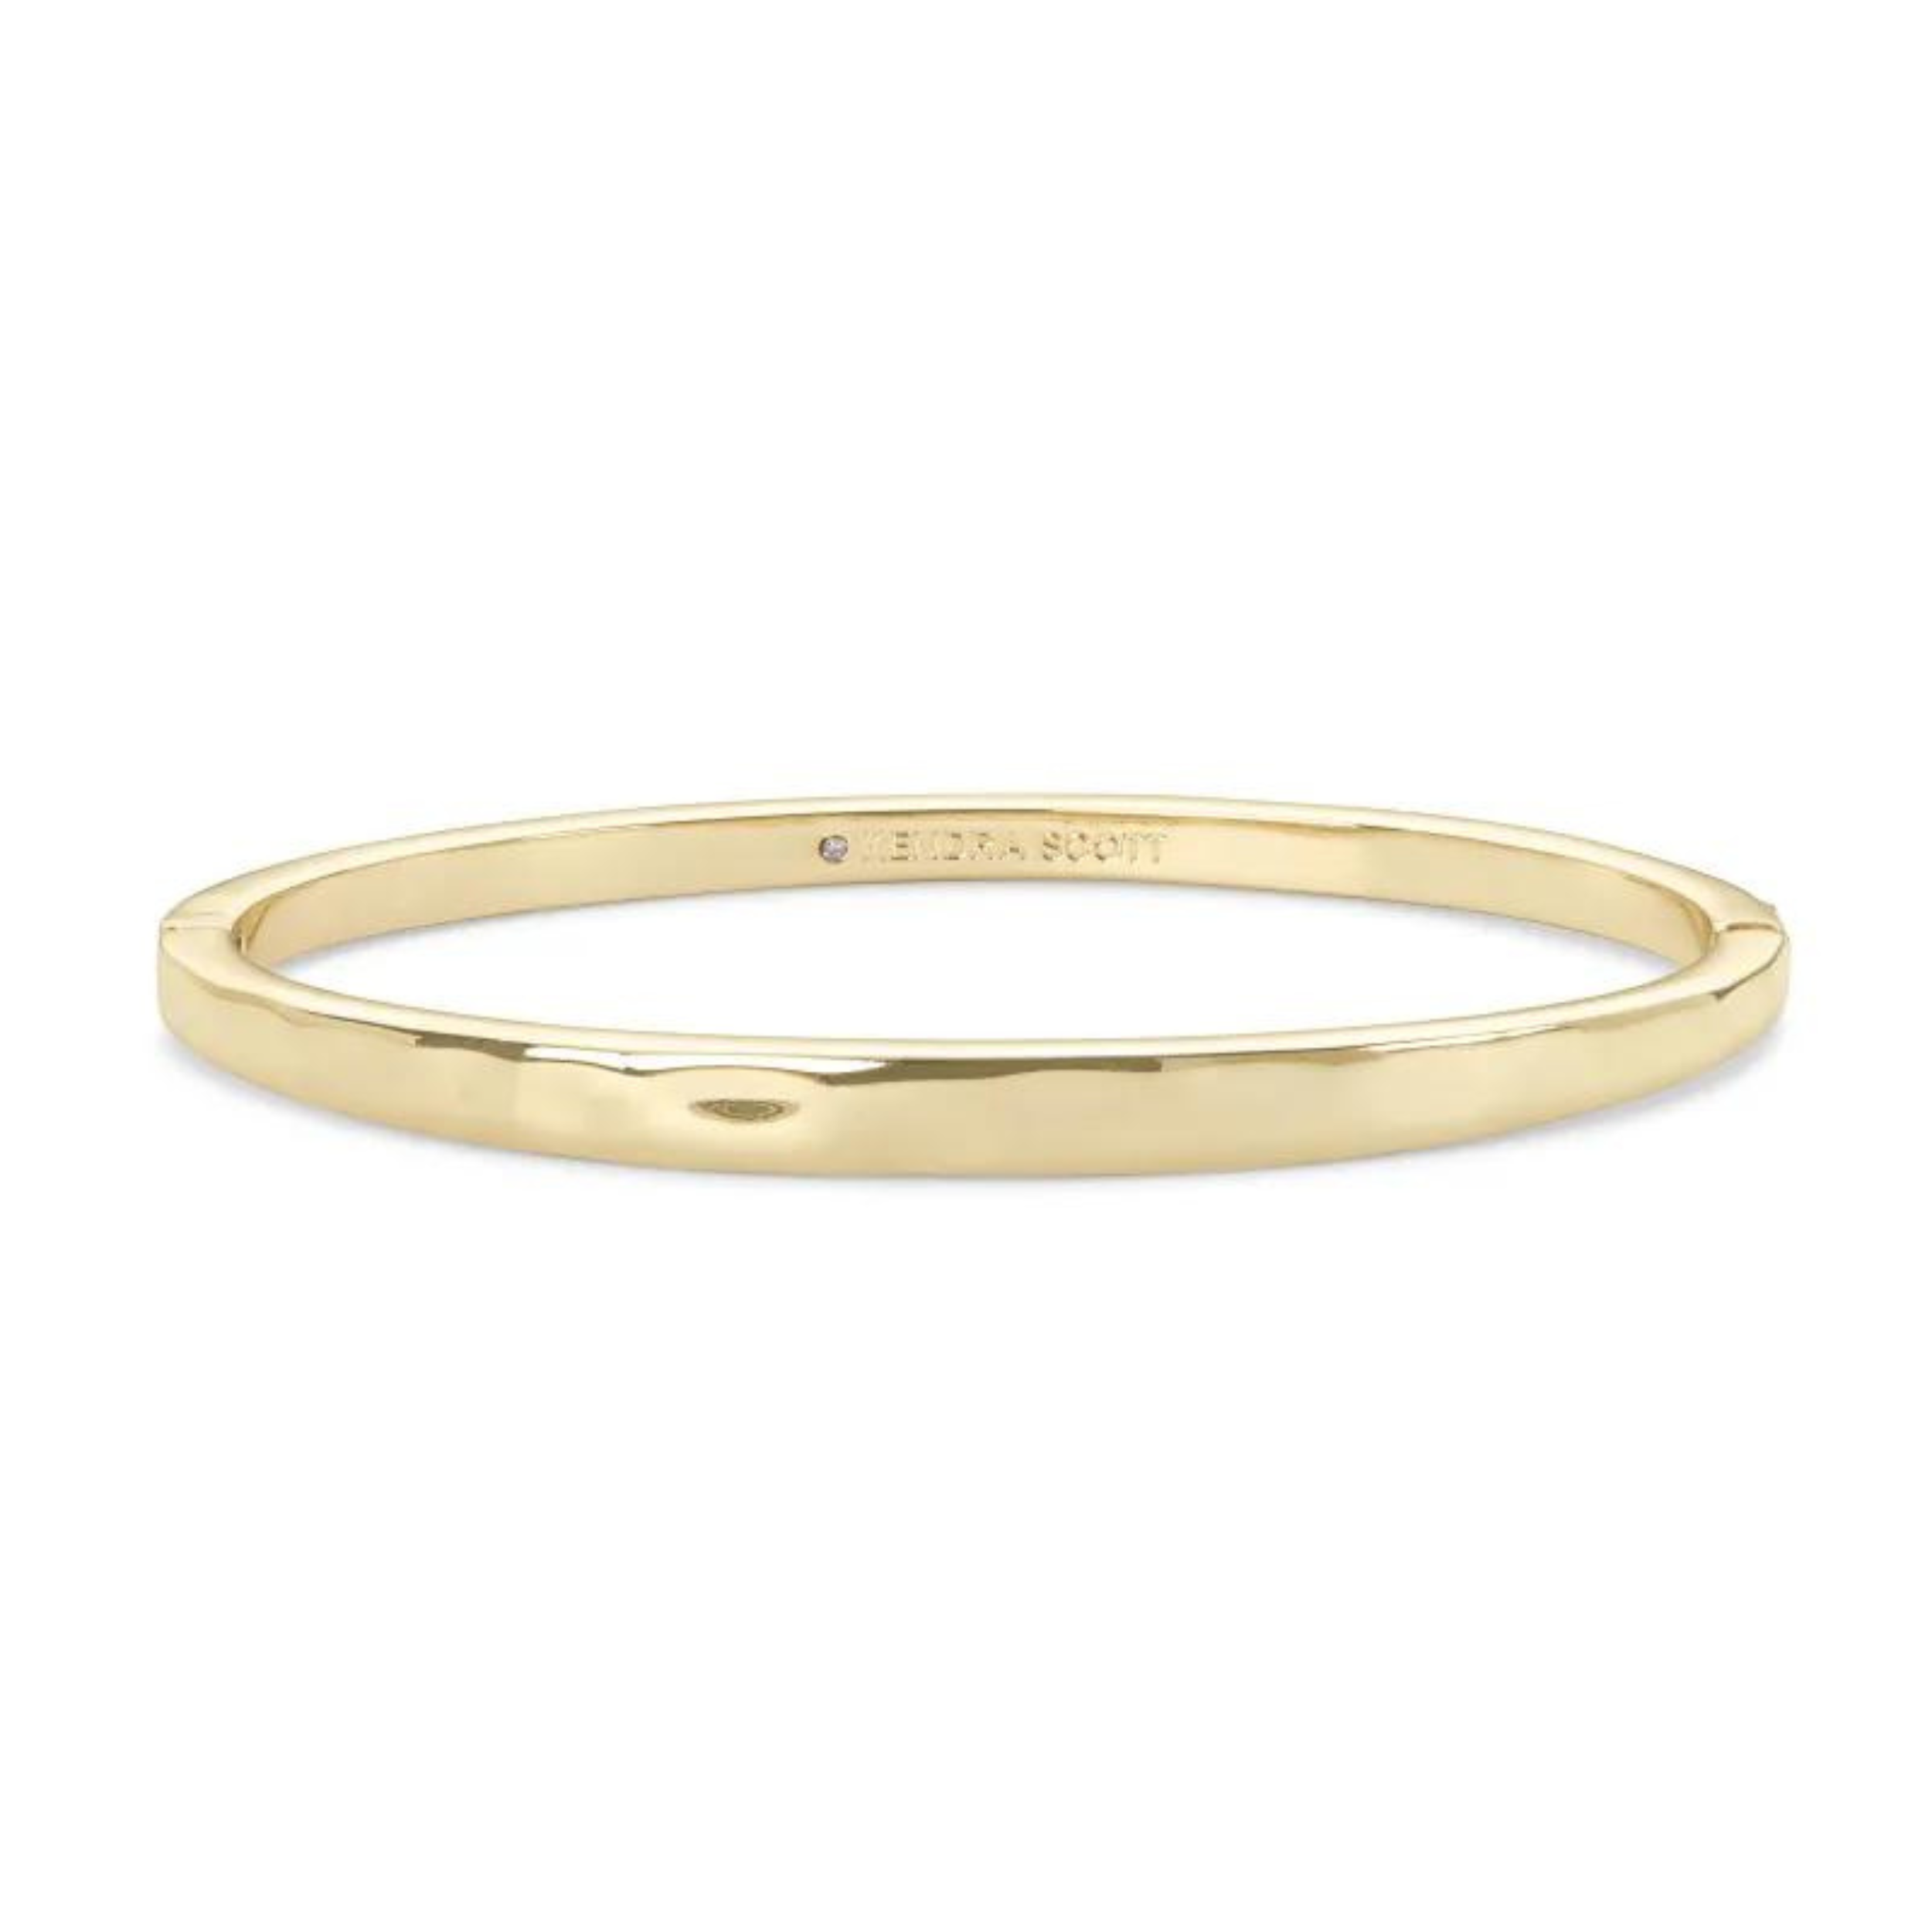 Gold bangle bracelet, pictured on a white background.